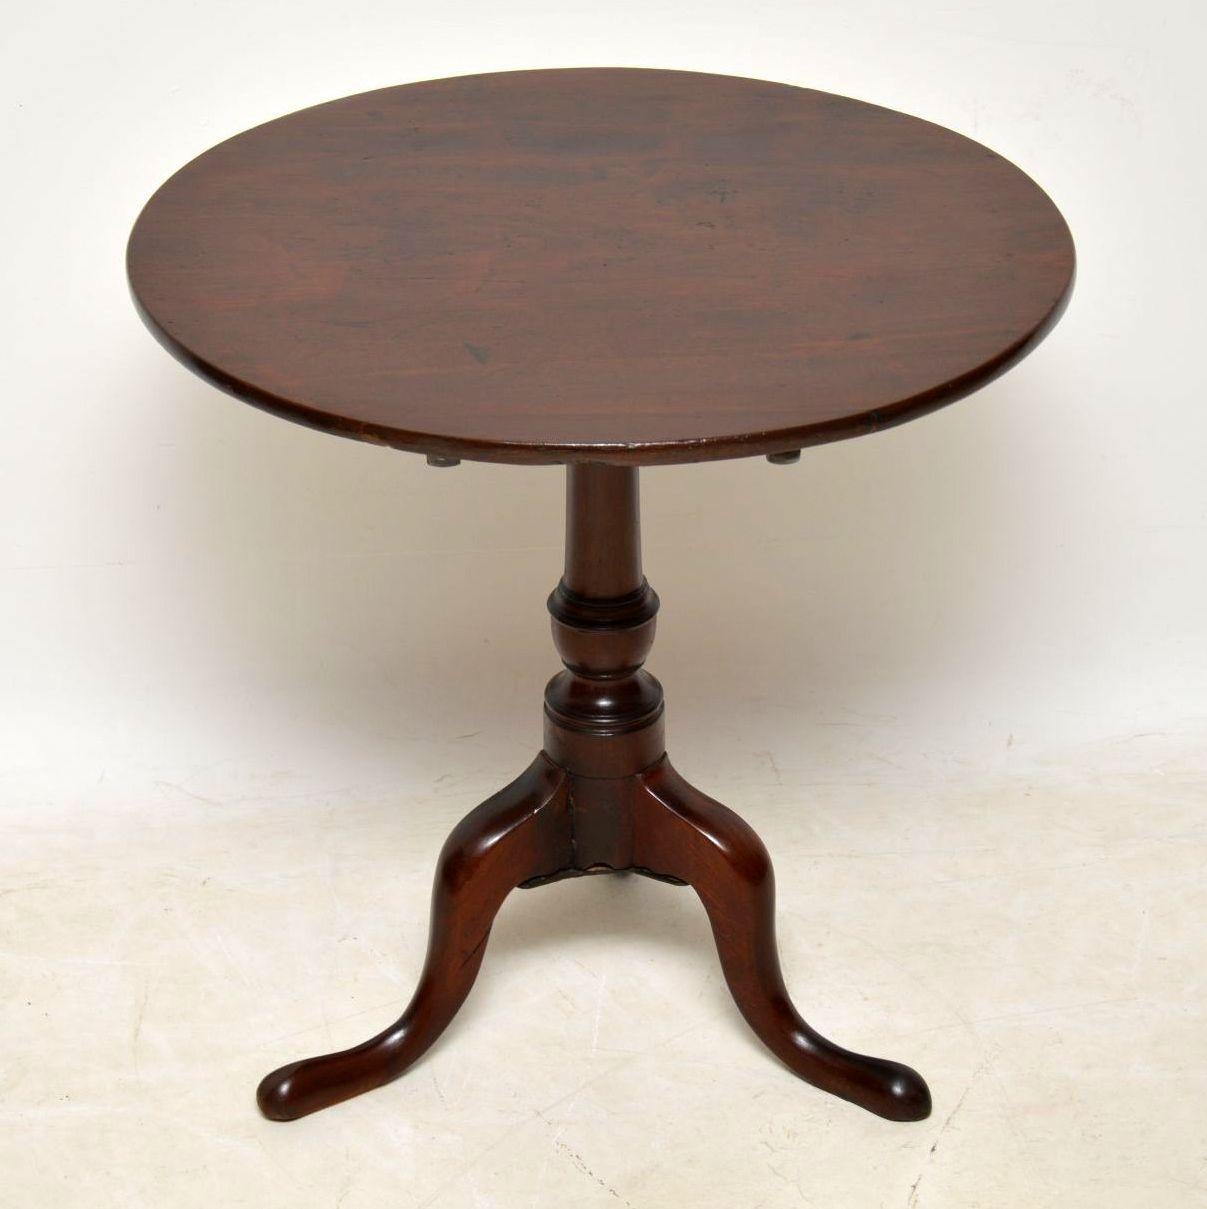 Antique George III solid mahogany period table in good condition and dating from circa 1790s period or possibly a bit earlier.

This table has a tilt mechanism and as you can see from the images, it all looks original. It has good proportions and